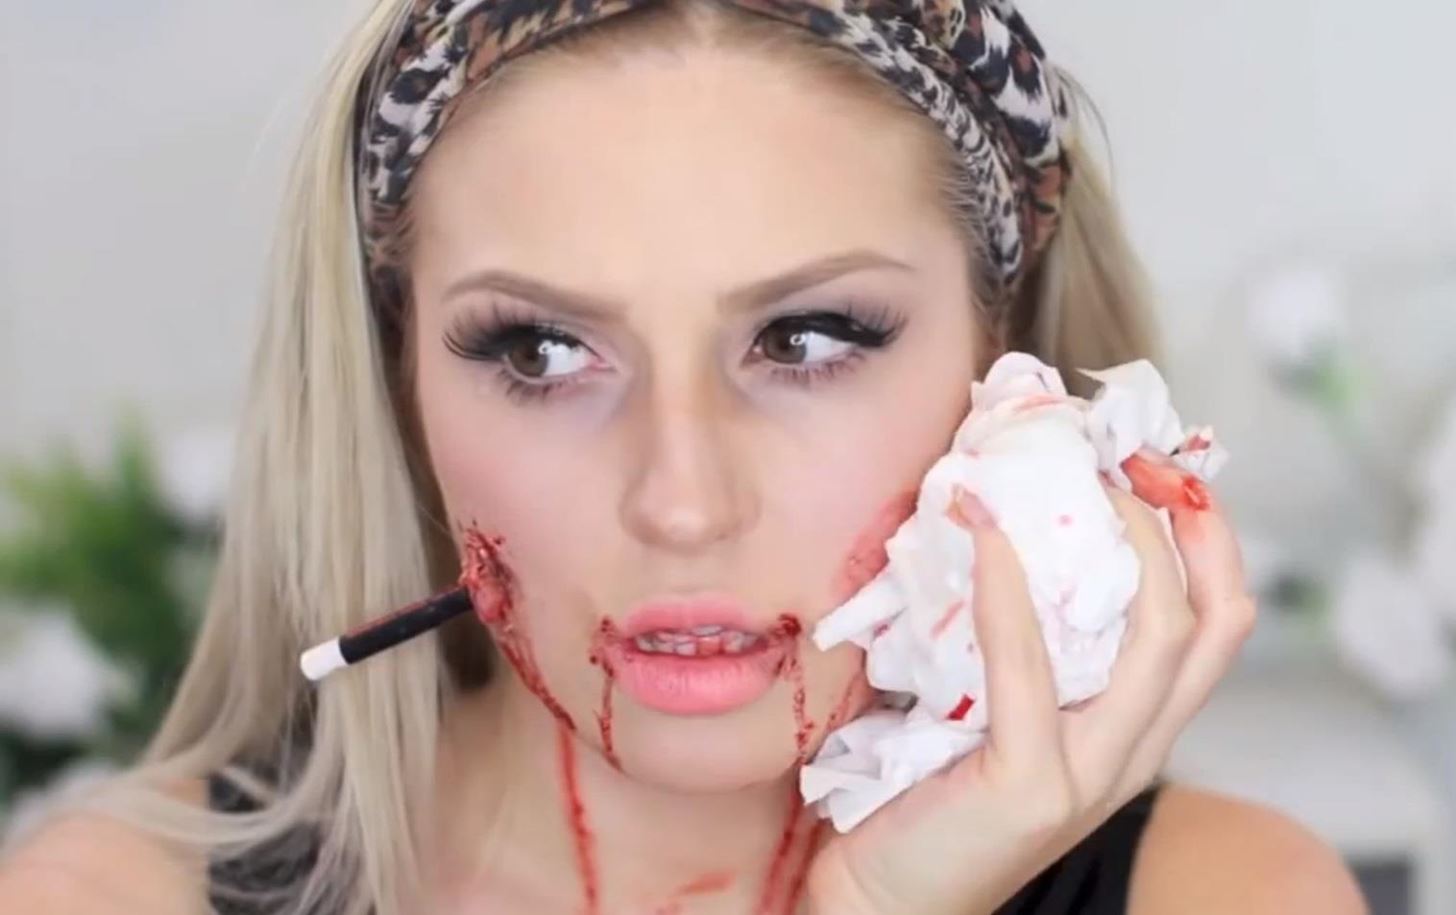 Impale Your Face for Halloween with This Bloody DIY Pencil Stabbing Victim Costume